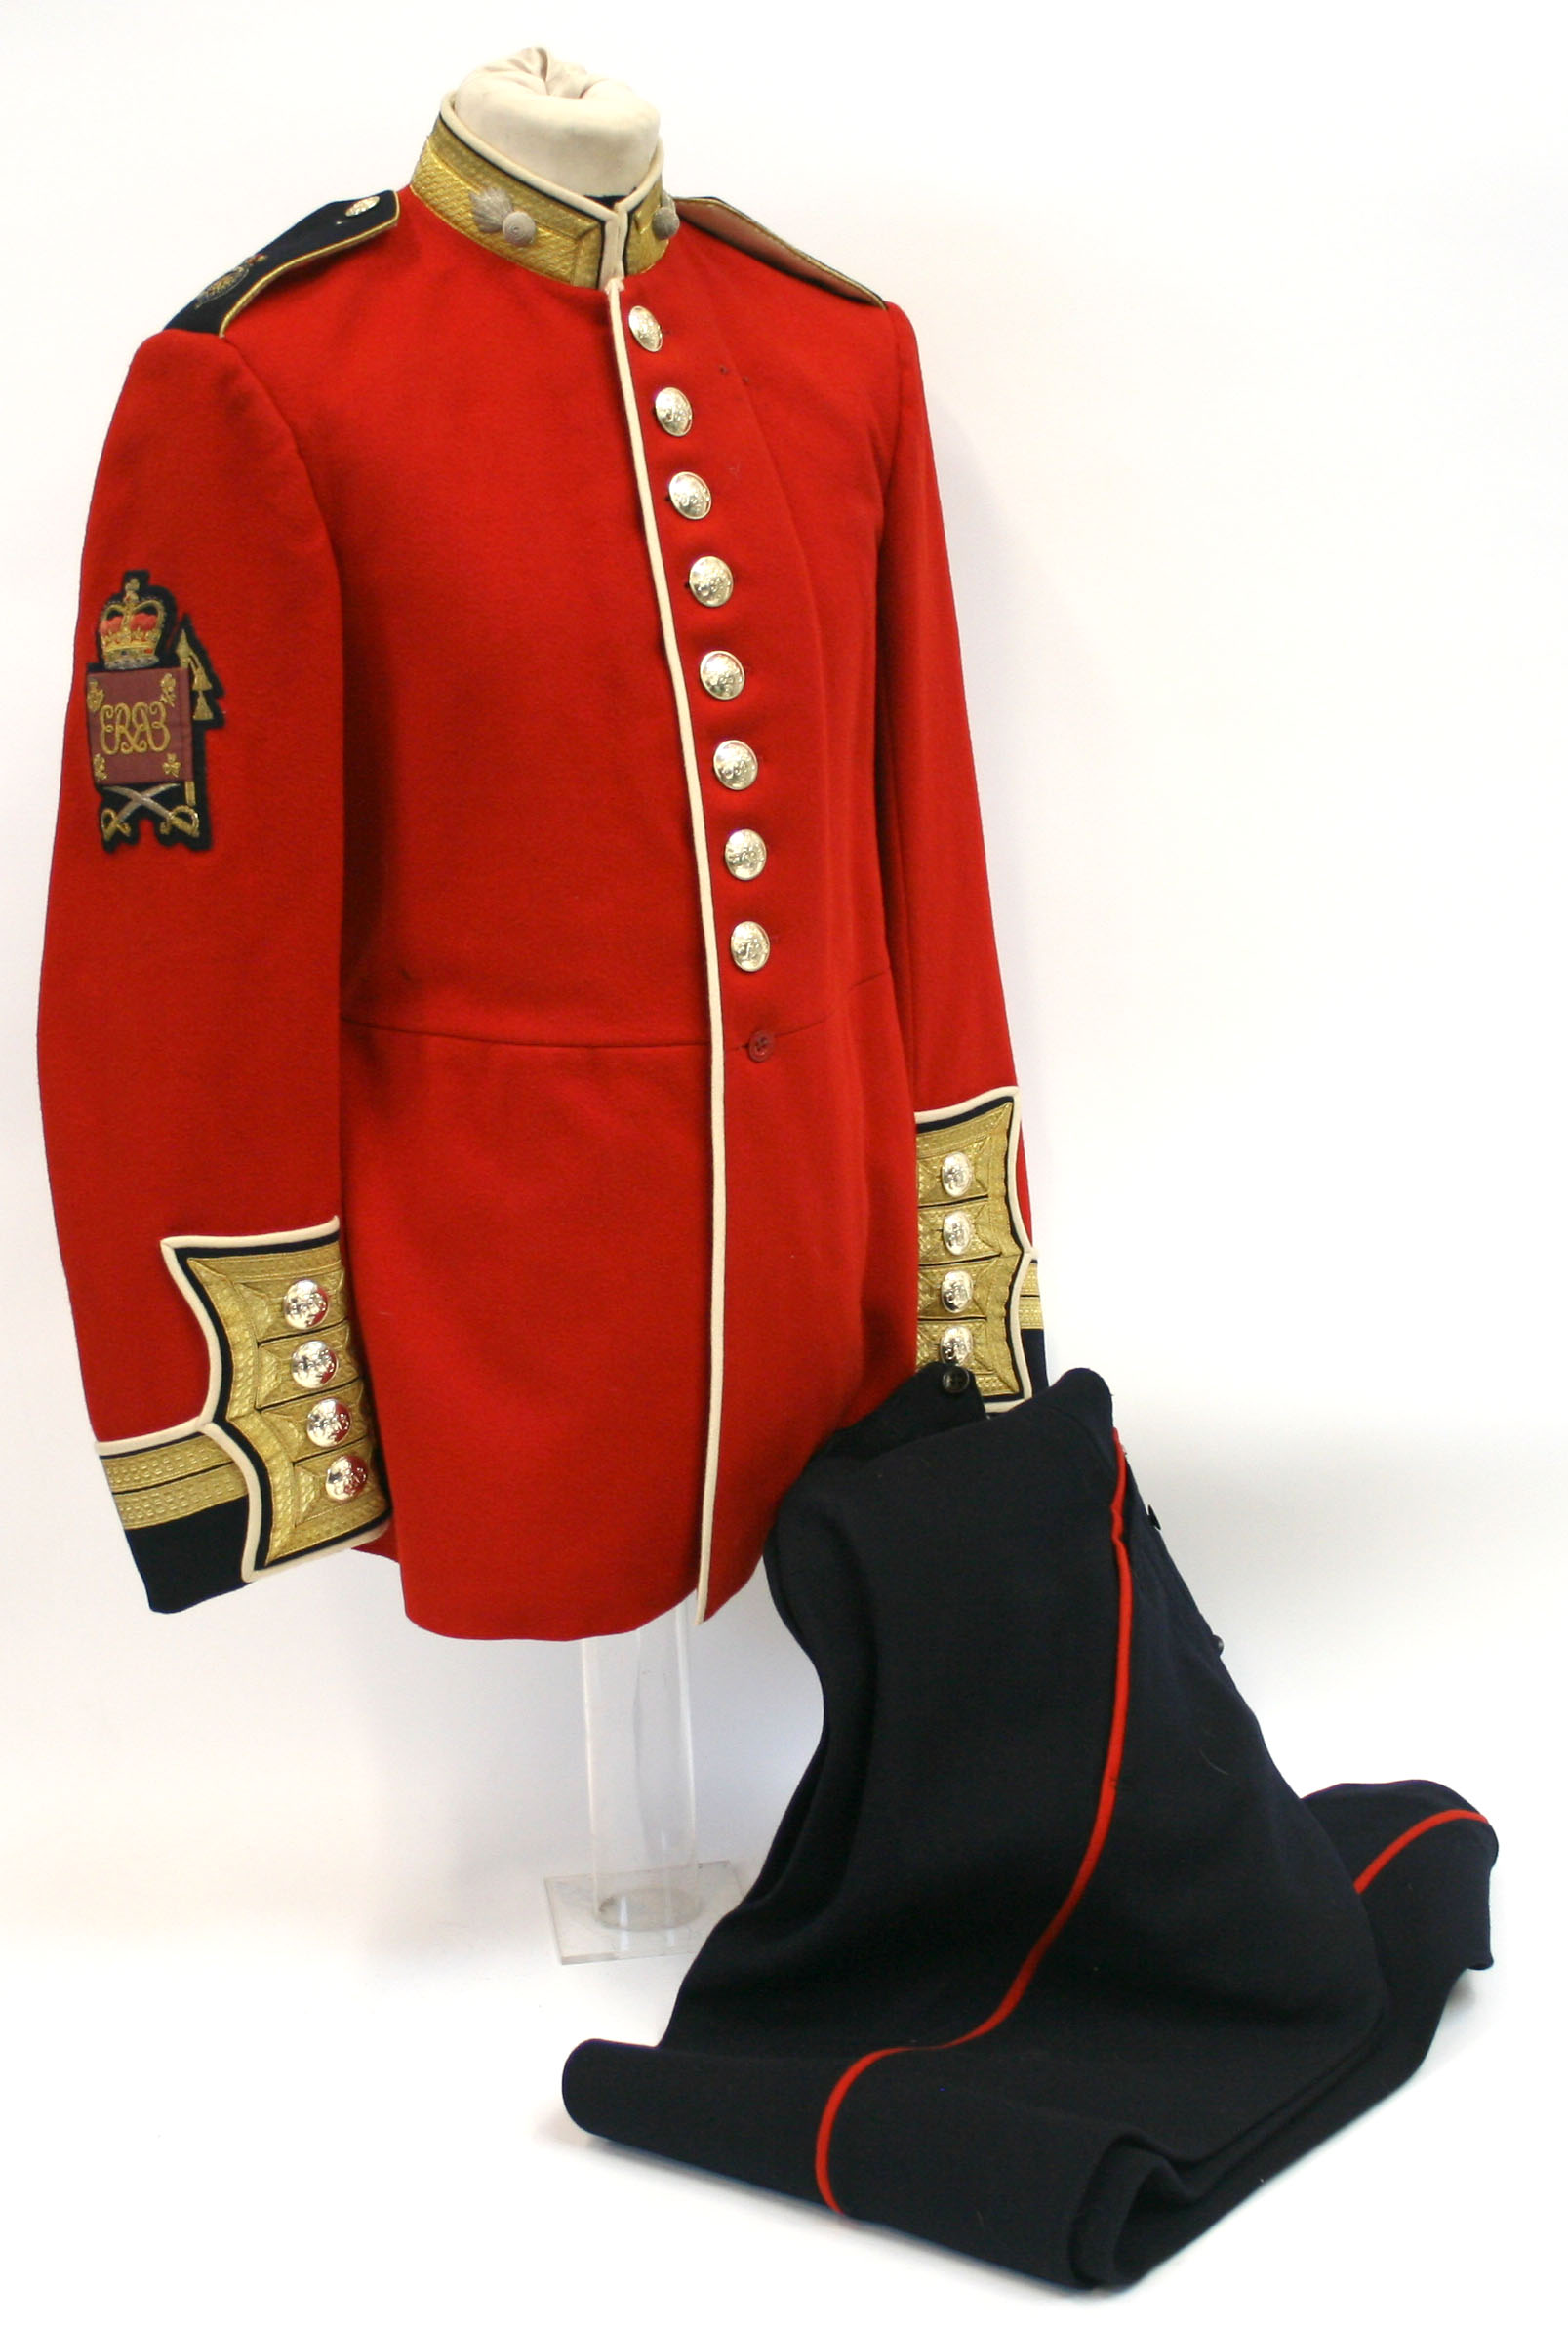 Post 1953 Grenadier Guards Colour Sergeants / Warrant Officers Dress Tunic of fine red cloth with